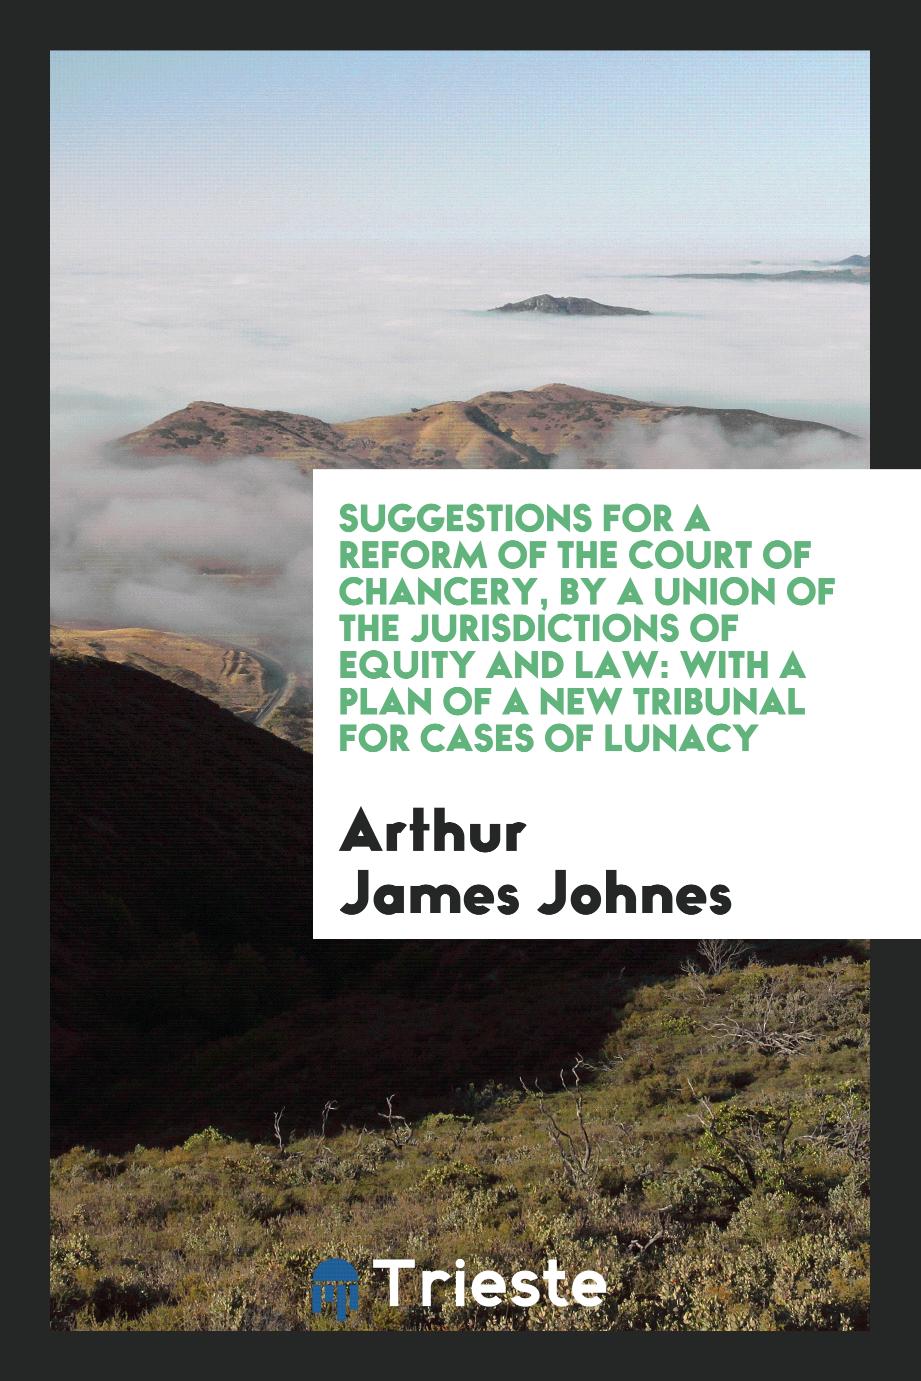 Suggestions for a Reform of the Court of Chancery, by a Union of the Jurisdictions of Equity and Law: With a Plan of a New Tribunal for Cases of Lunacy